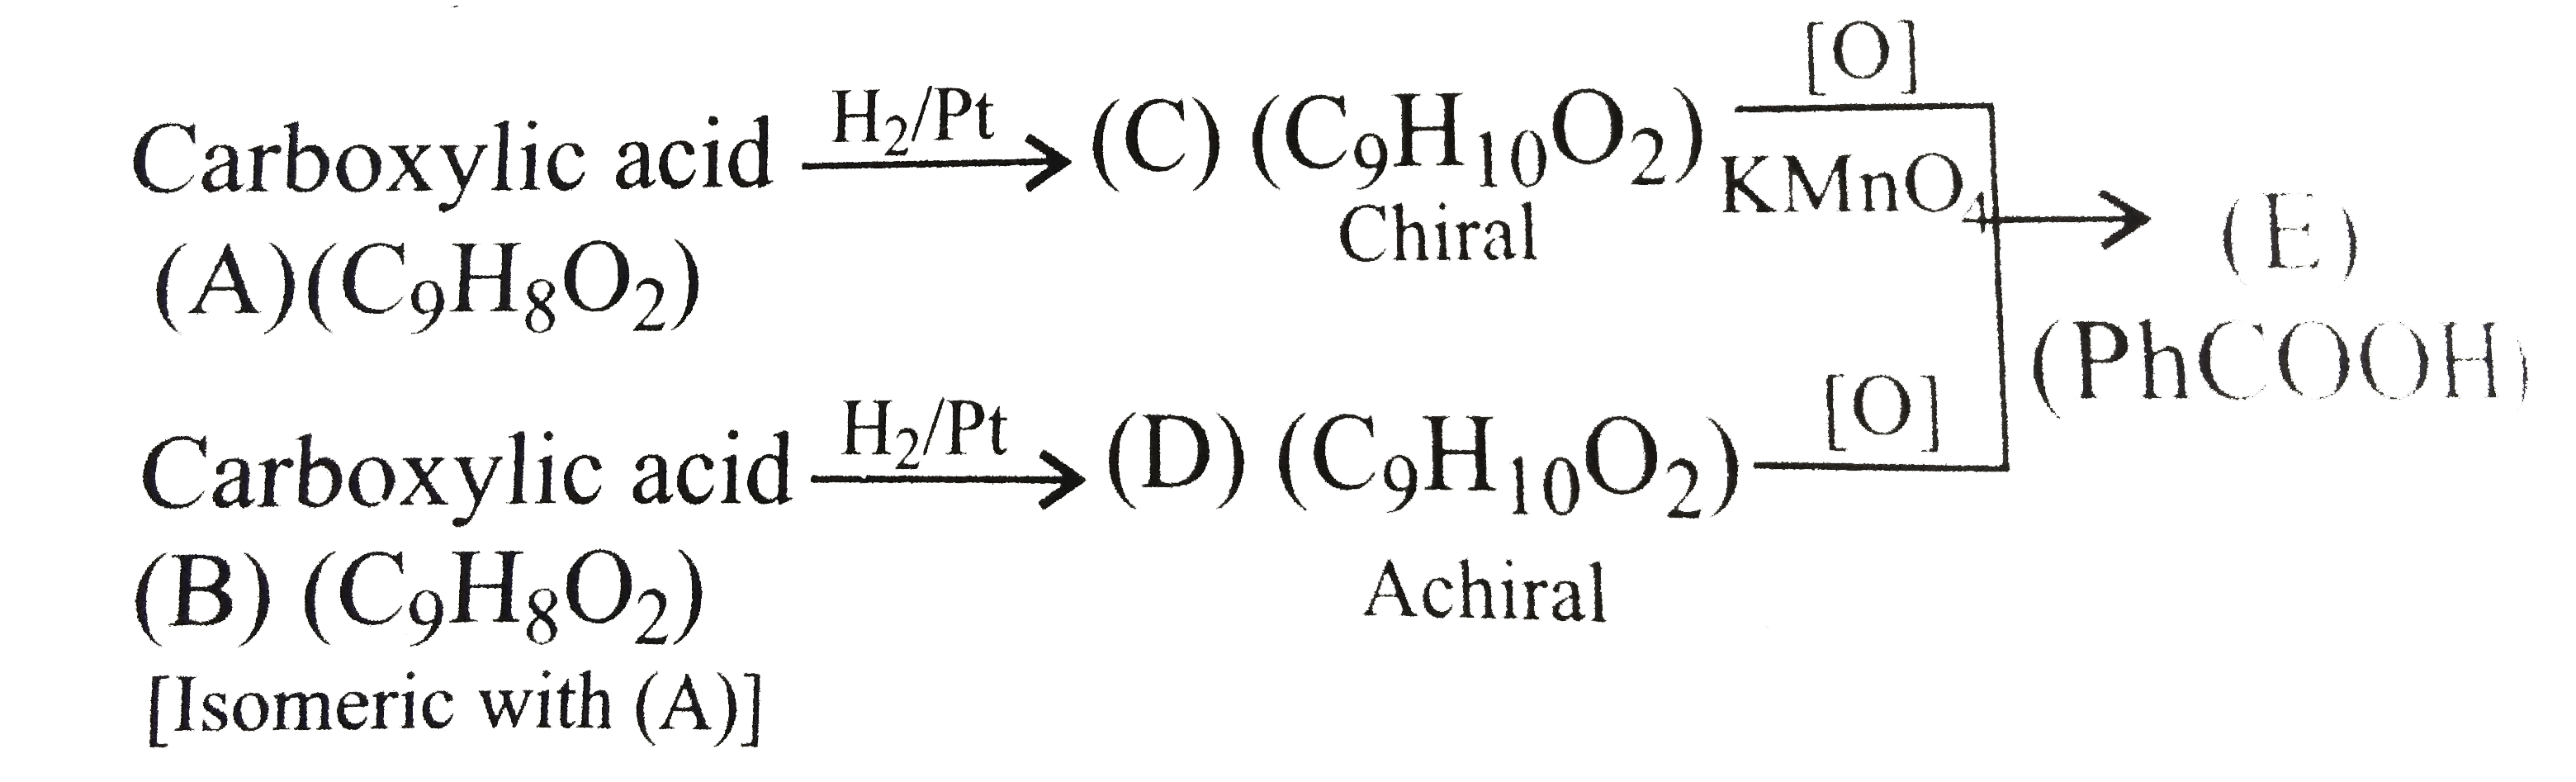 Compounds ( C) and (D) can be distinguished by :